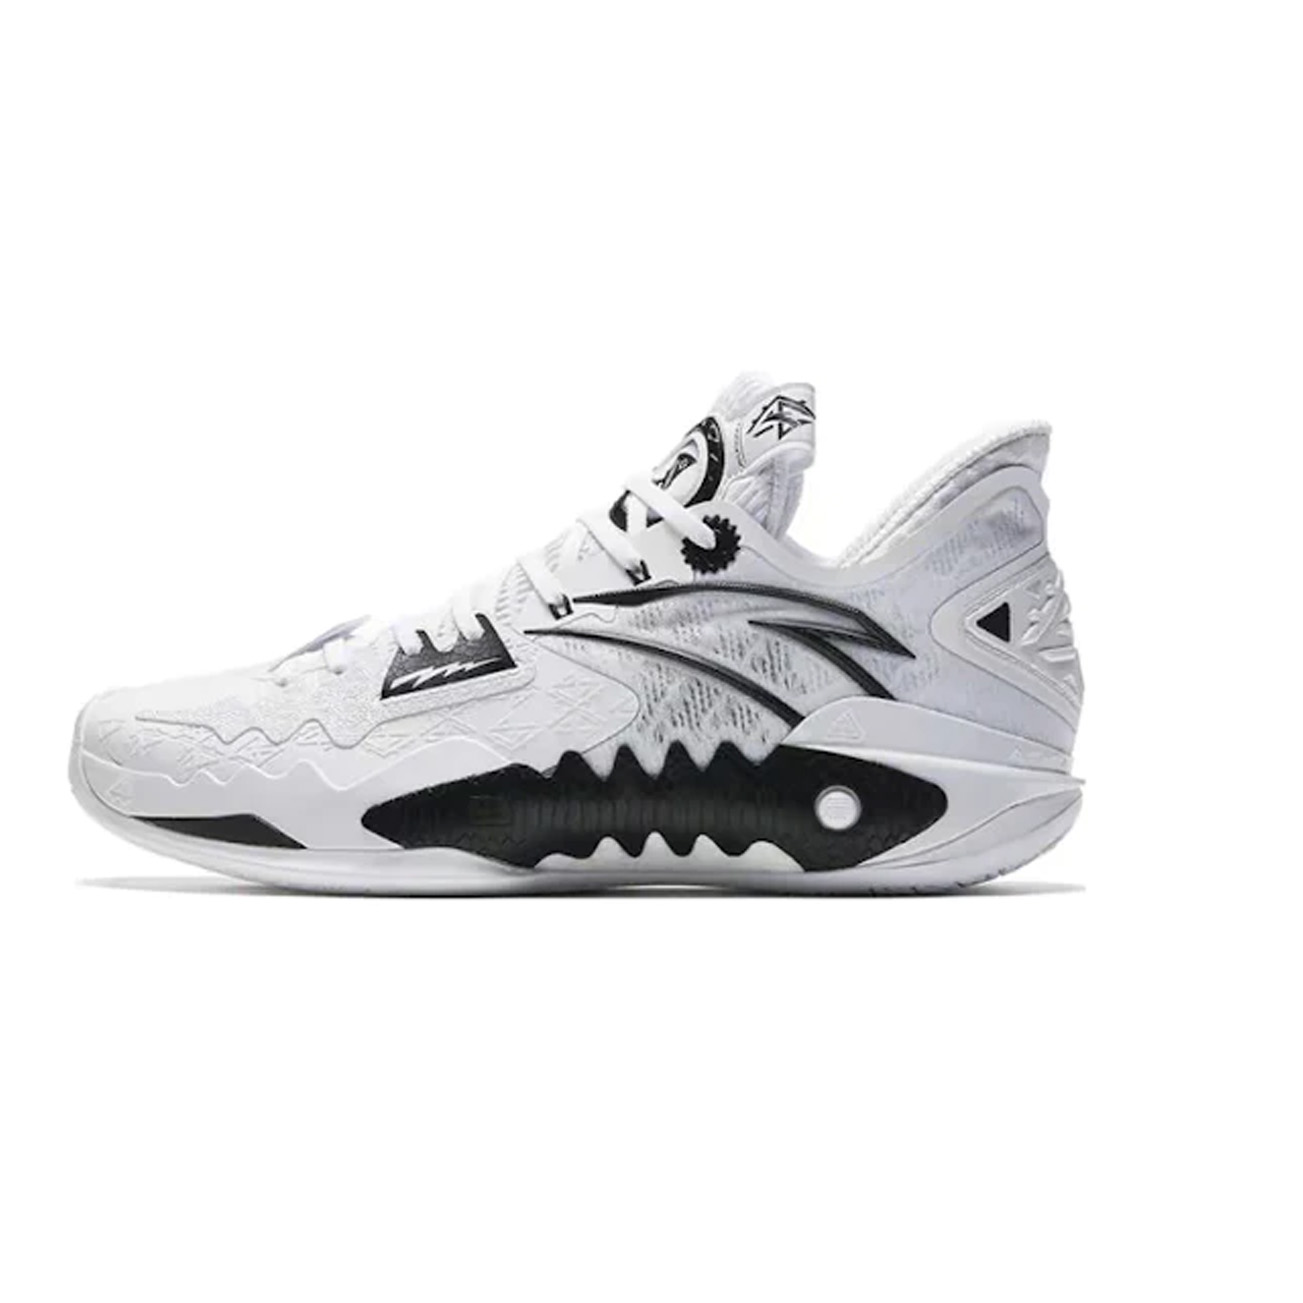 ANTA Shock Wave 5 'First Year' basketball shoes in black and white